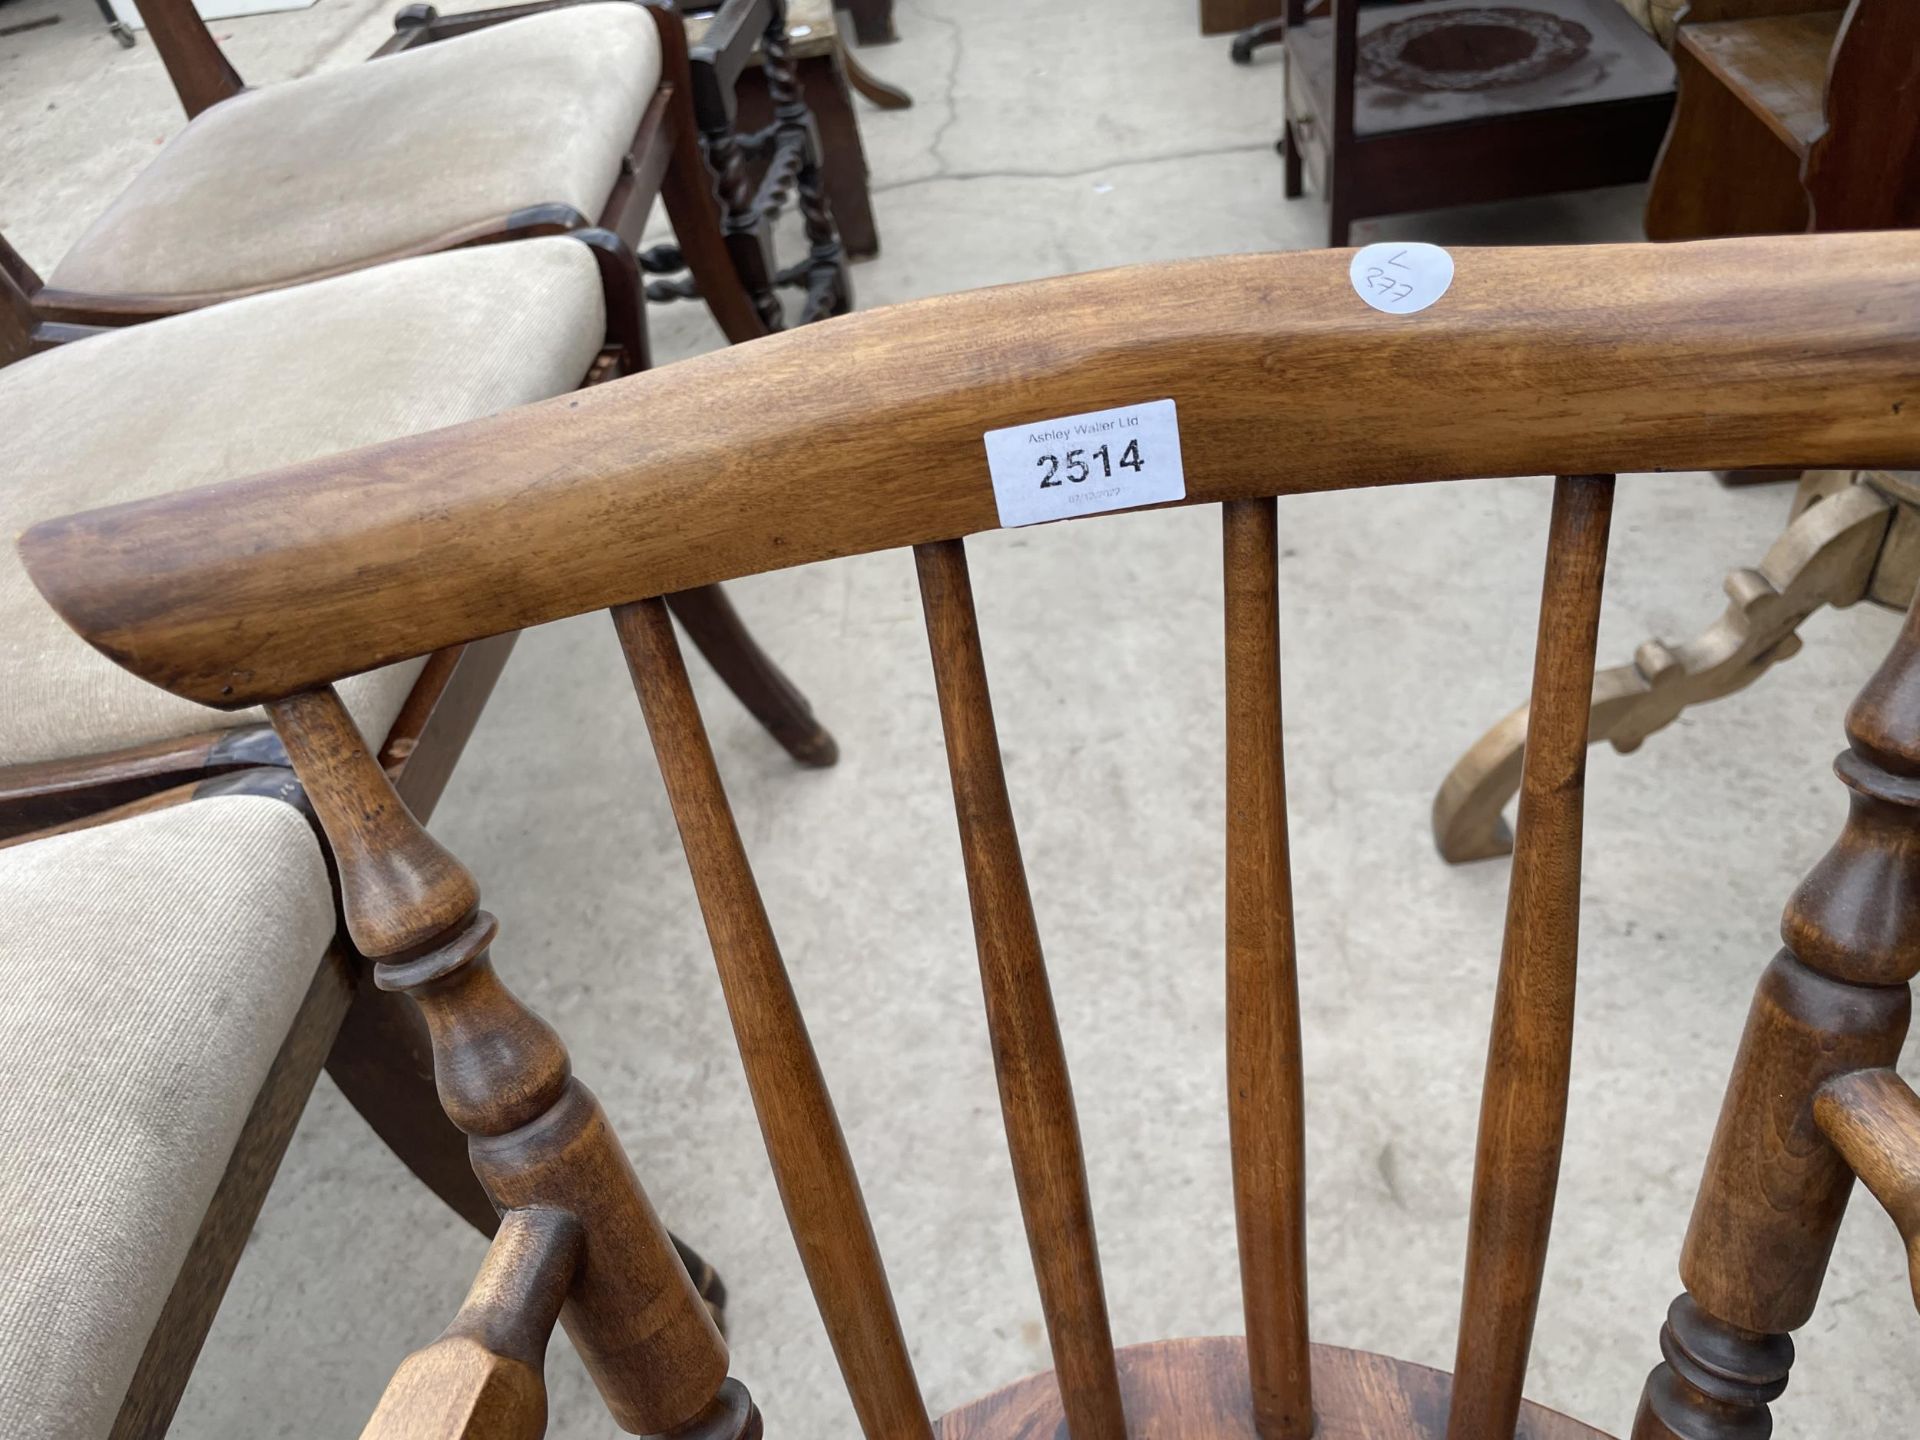 A VICTORIAN STYLE CHILDS ELBOW CHAIR BEARING 'IBEX' LABEL AND VICTORIAN PARLOUR CHAIR - Image 3 of 4